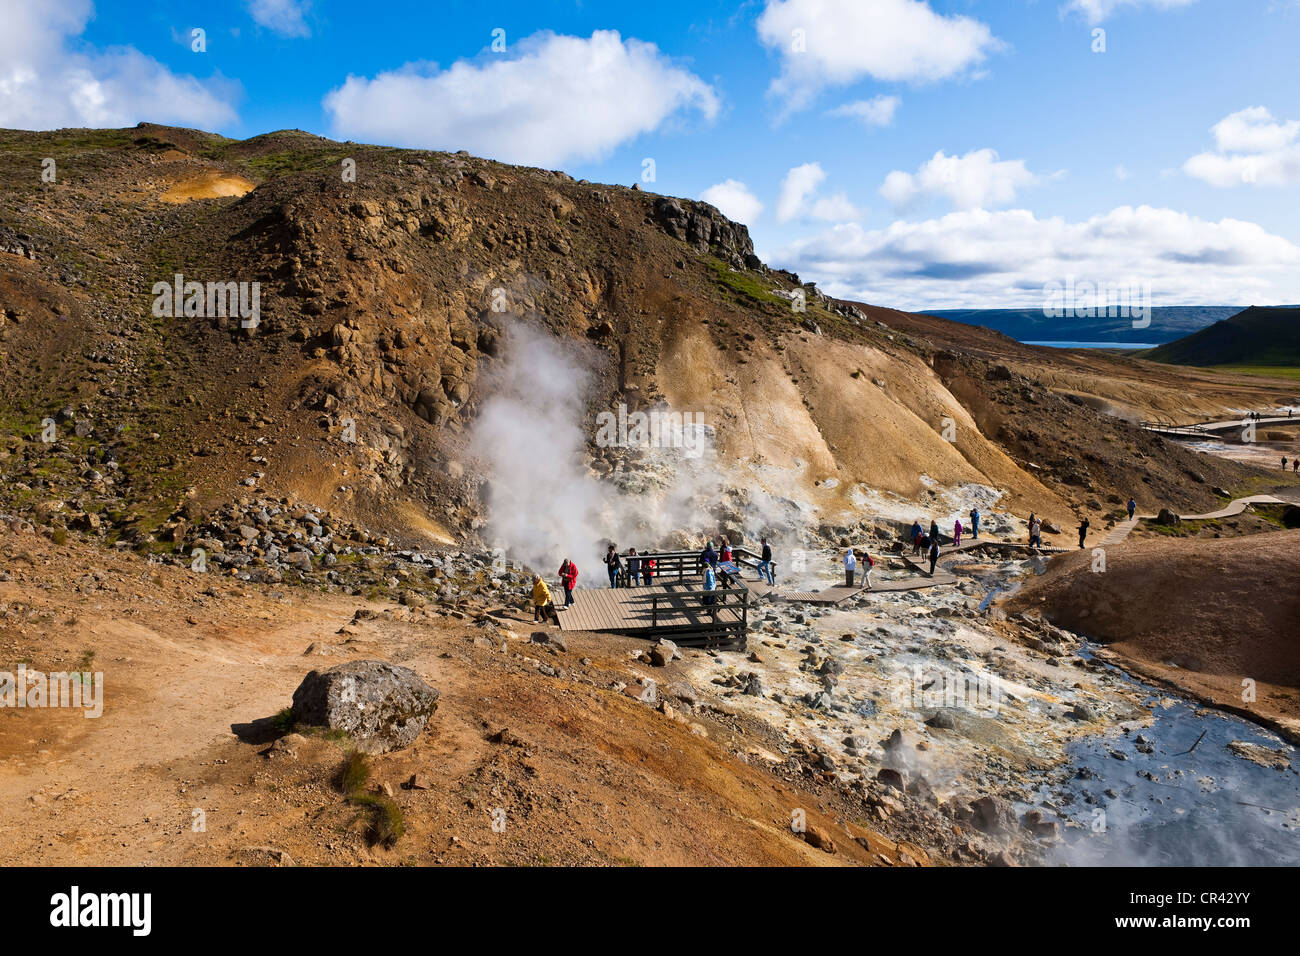 Iceland, Reykjavik region, Krisuvik Valley, solfatares and fumaroles of Seltun geothermical area Stock Photo